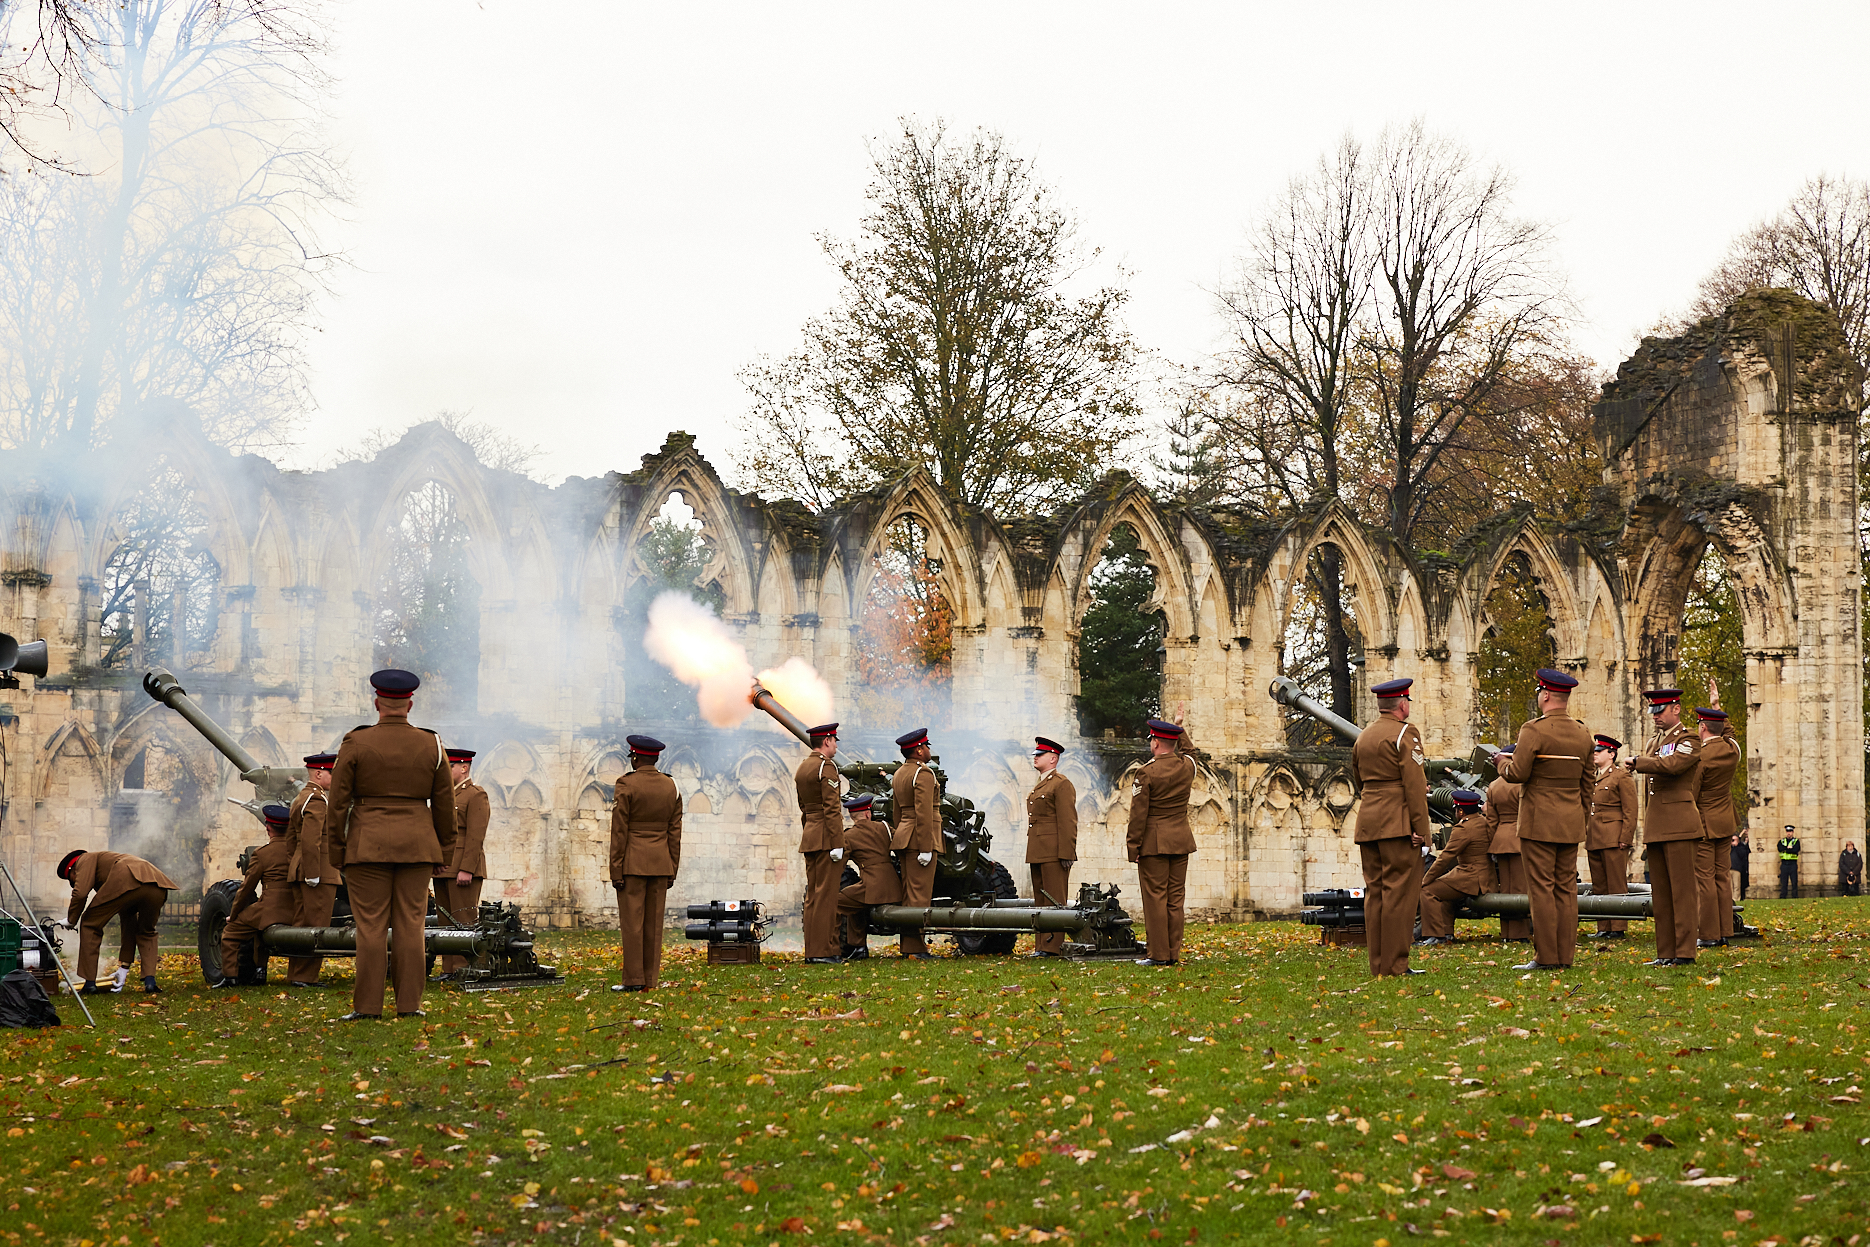 soldiers in the act of firing the gun carriages